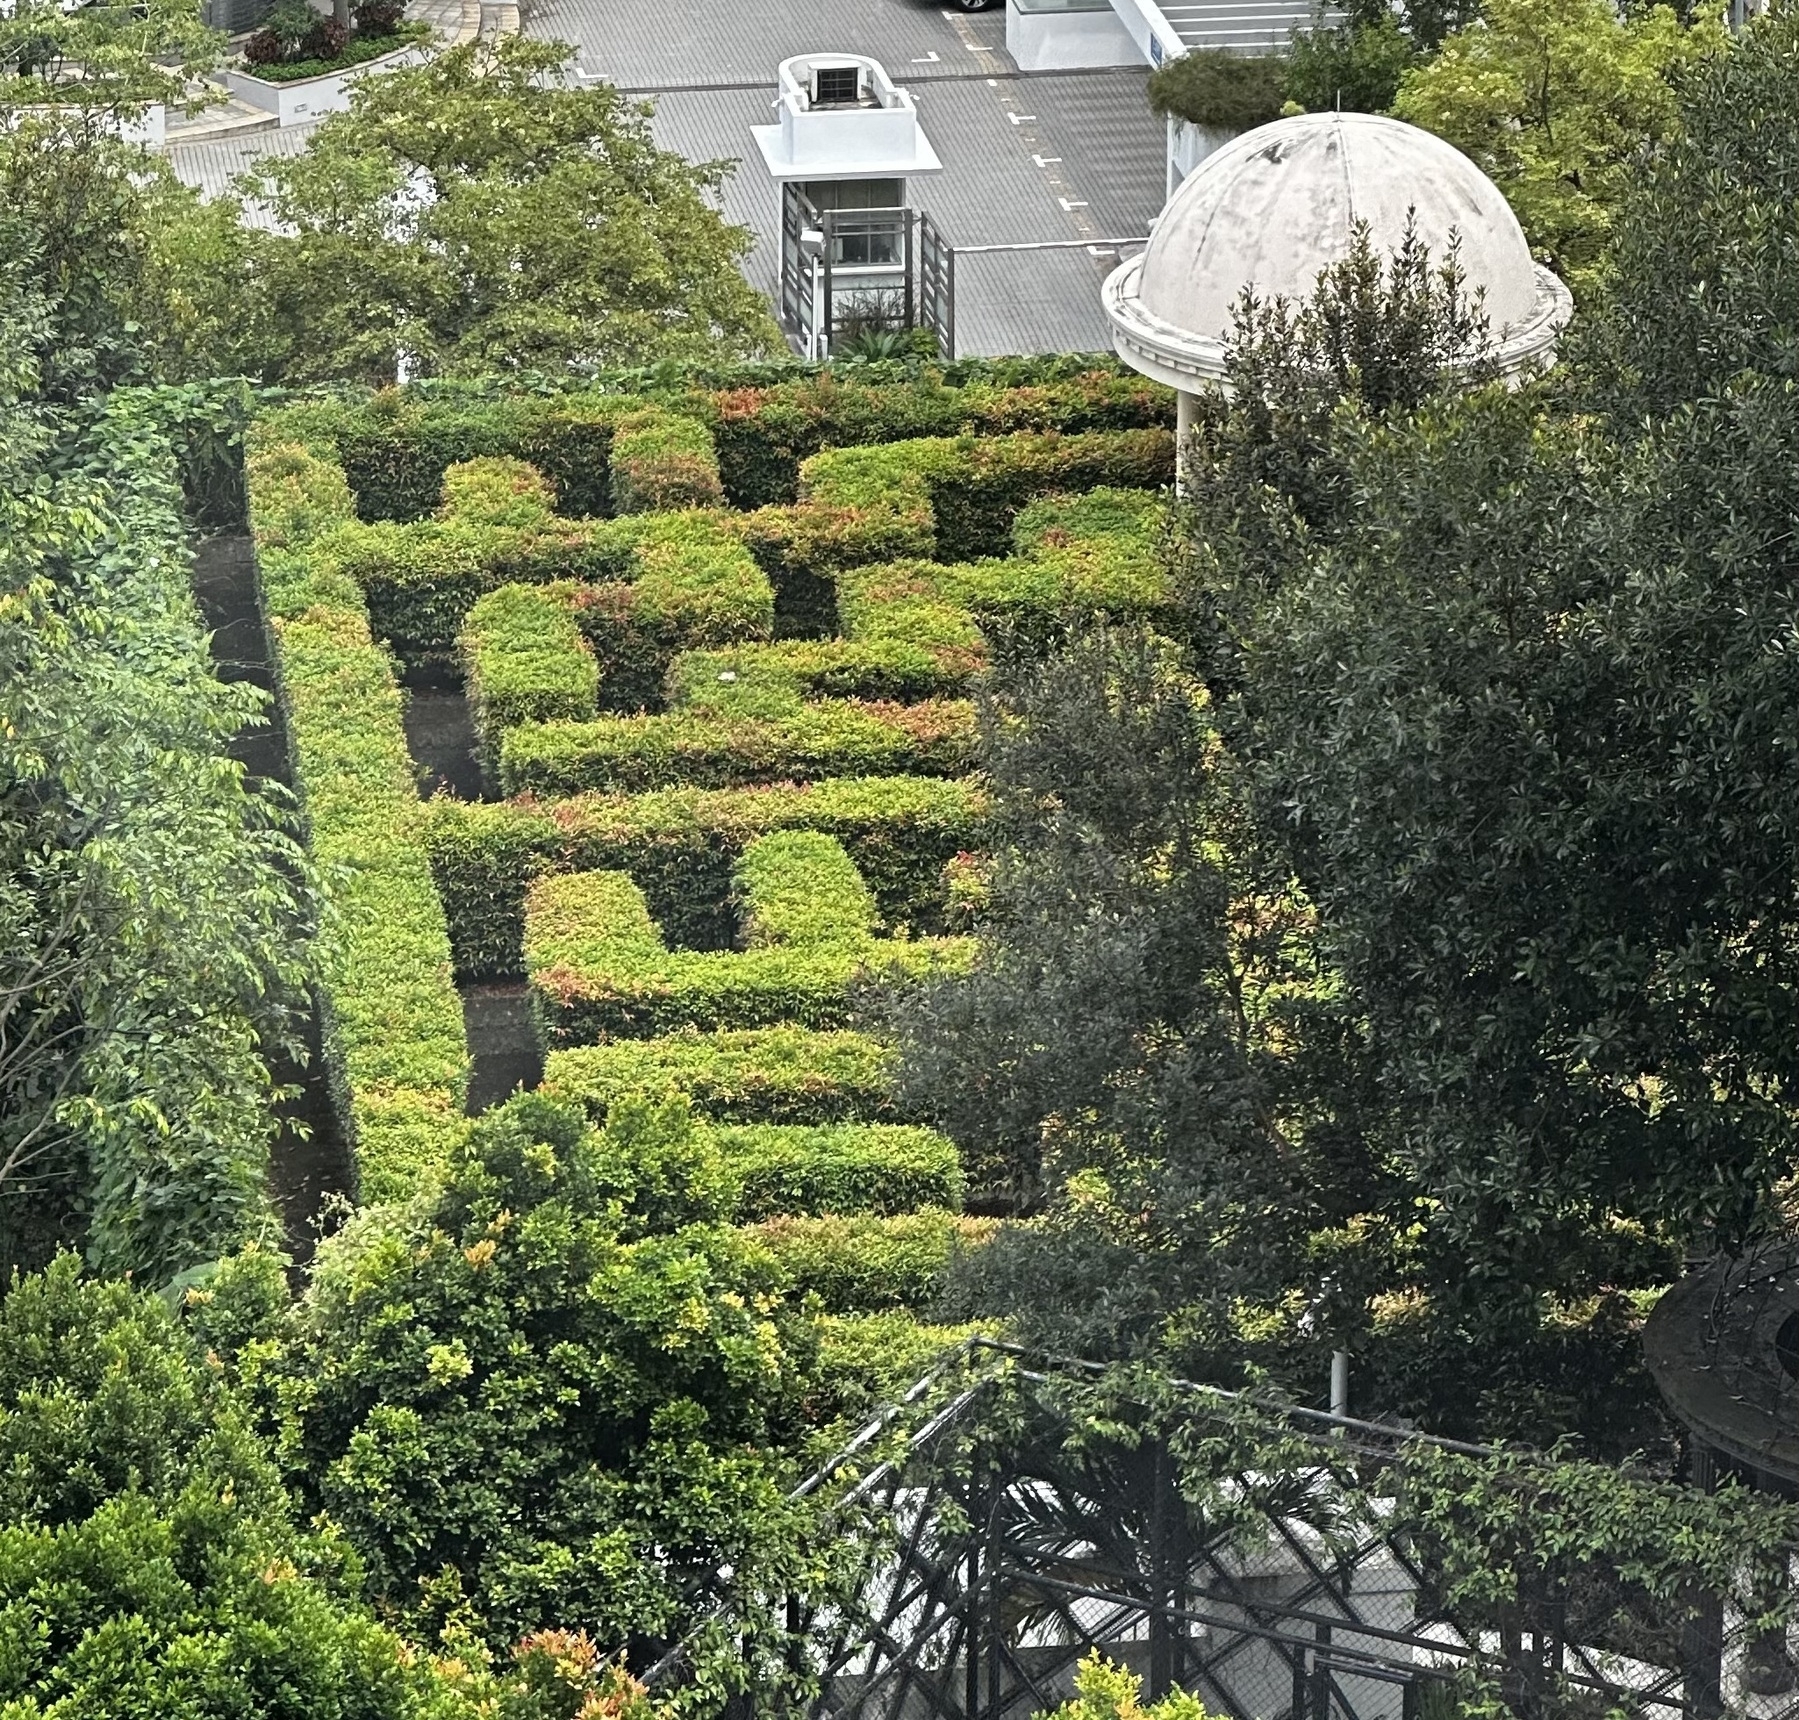 A hedge maze in Singapore.